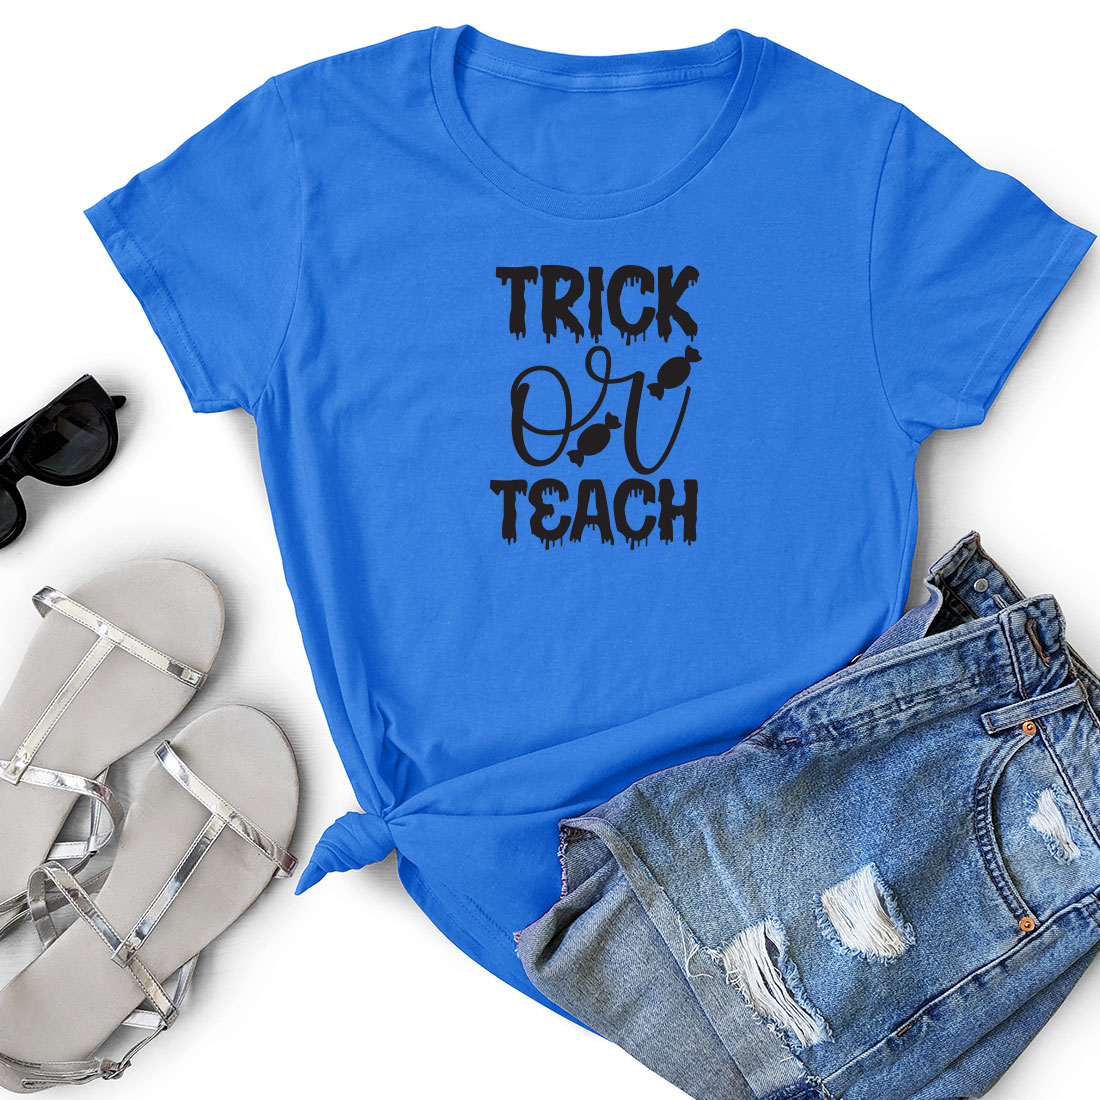 T - shirt that says trick or teach next to a pair of shorts.